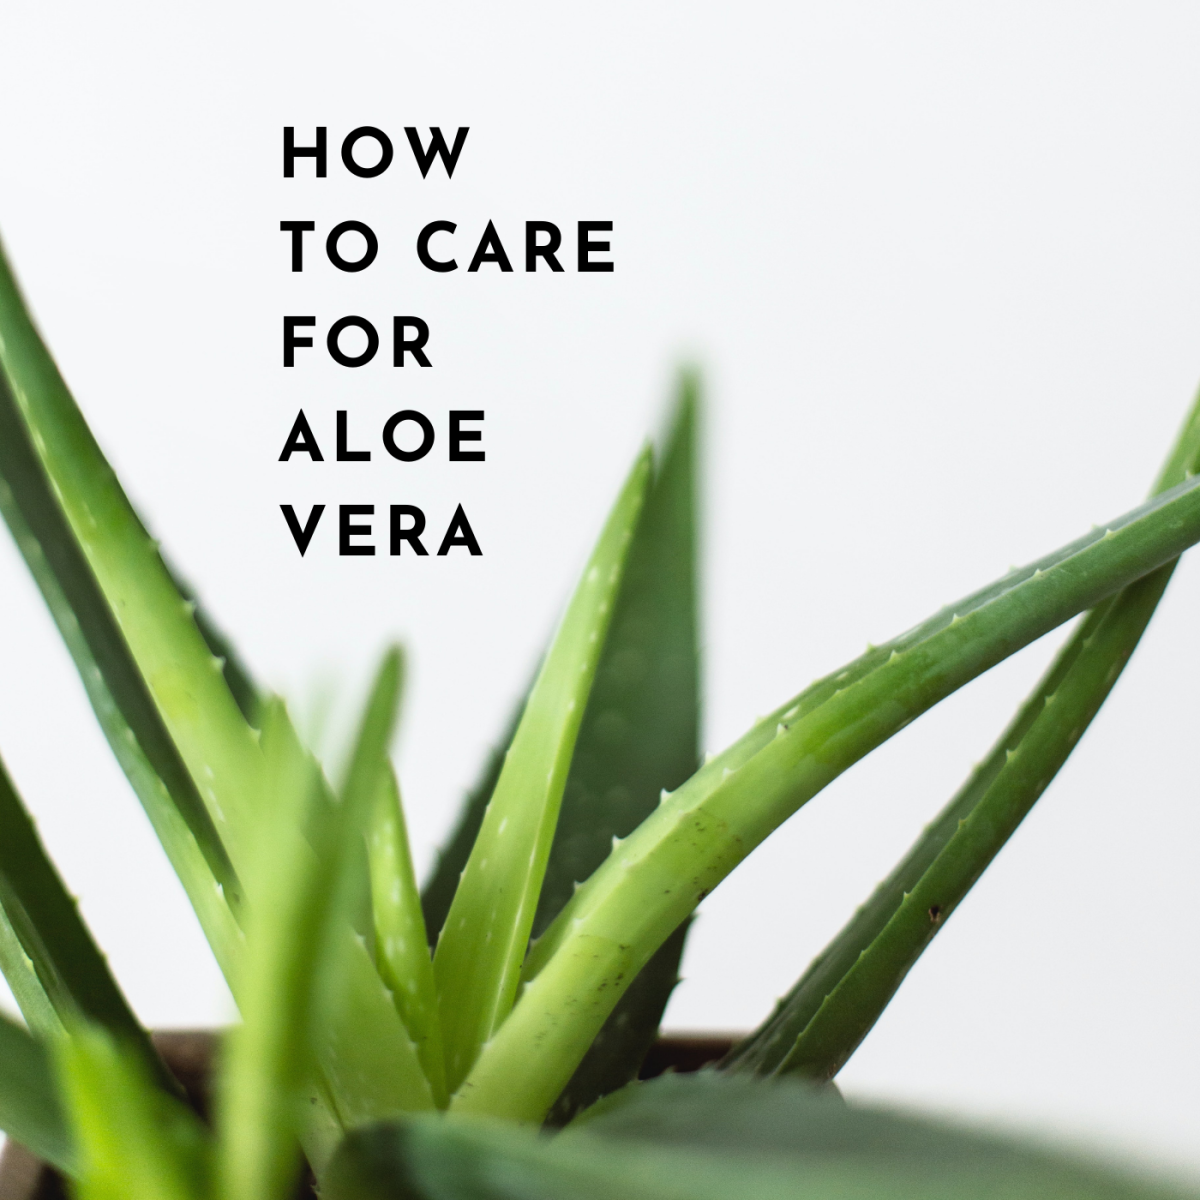 Aloe vera is a low-maintenance plant with beneficial properties.